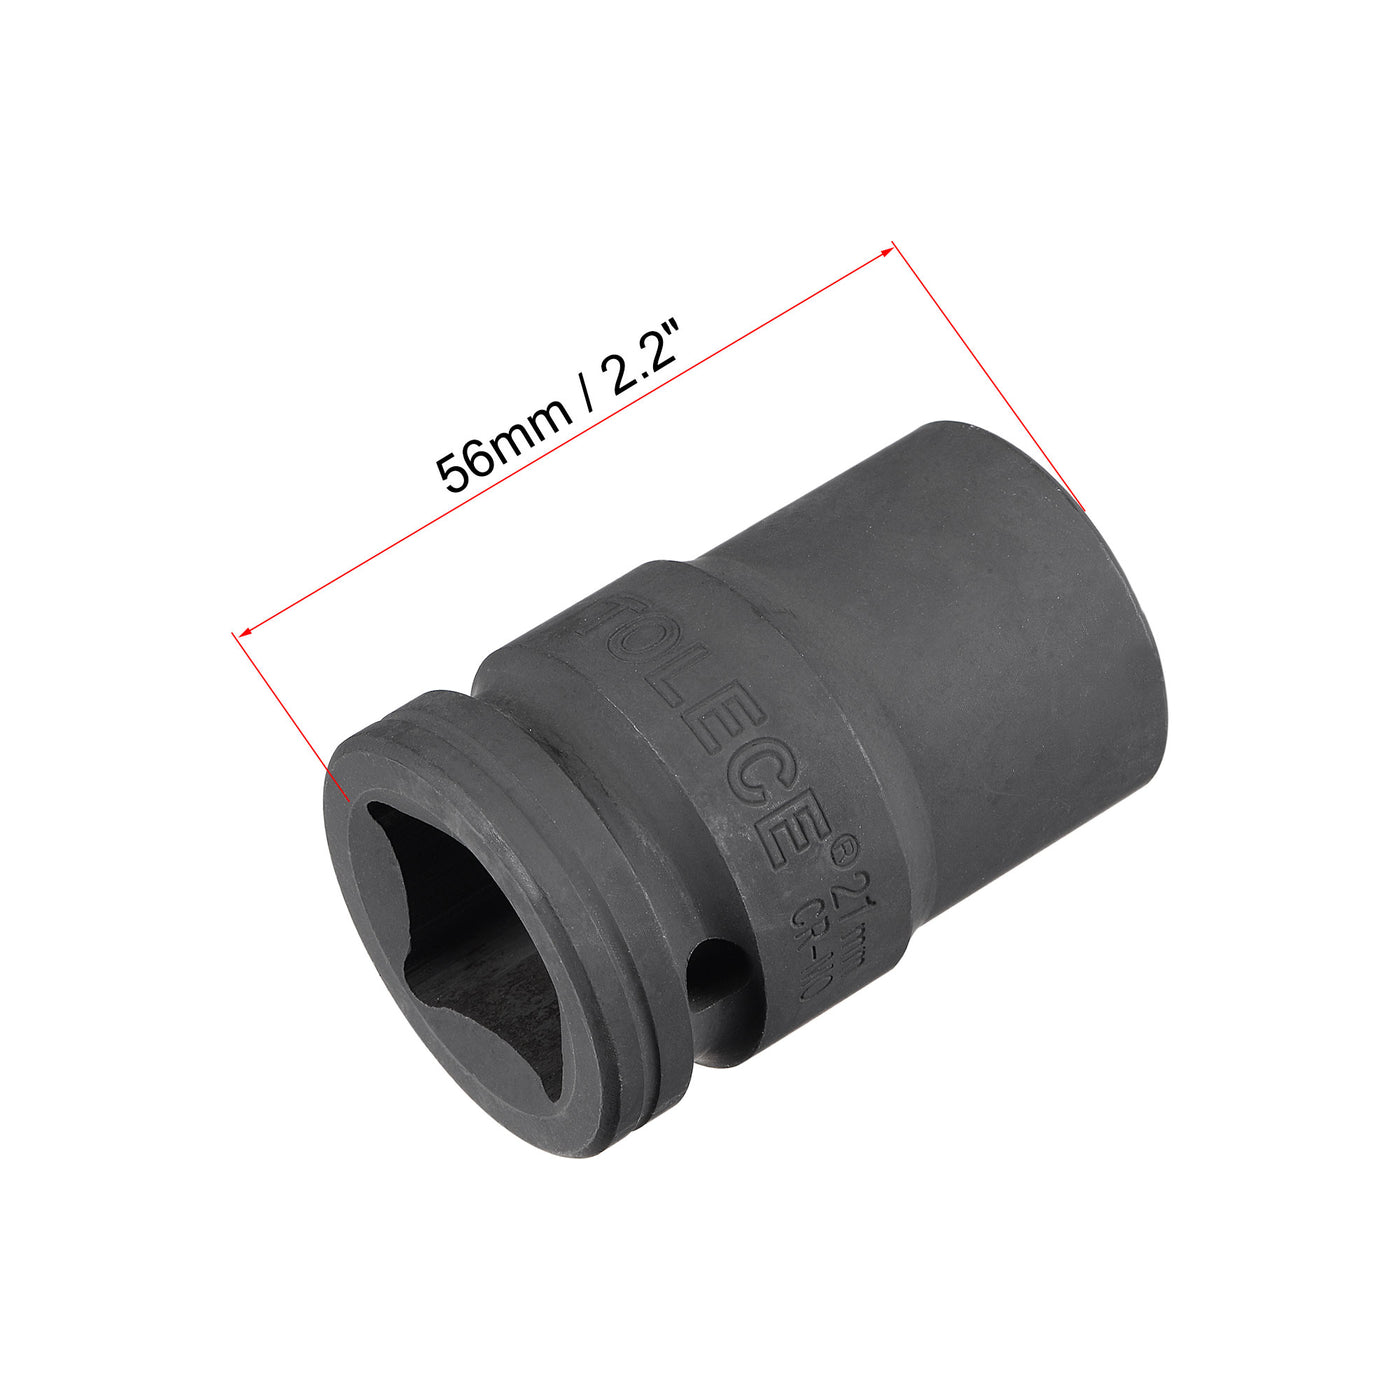 uxcell Uxcell 3/4" Drive 21mm 12-Point Impact Socket, CR-MO Steel 56mm Length, Standard Metric